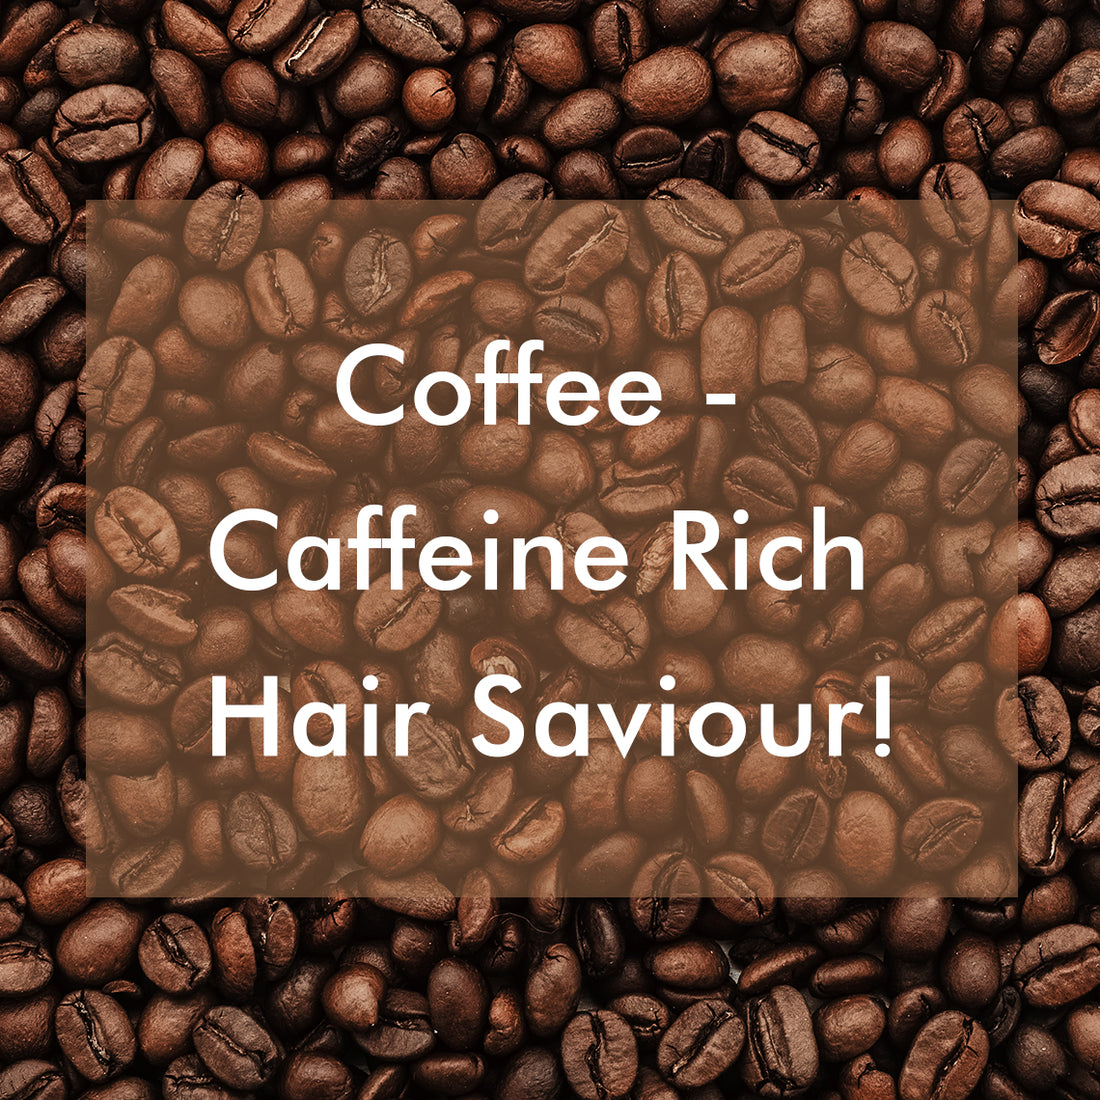 Coffee for Hair - Benefits of Caffeine for Hair